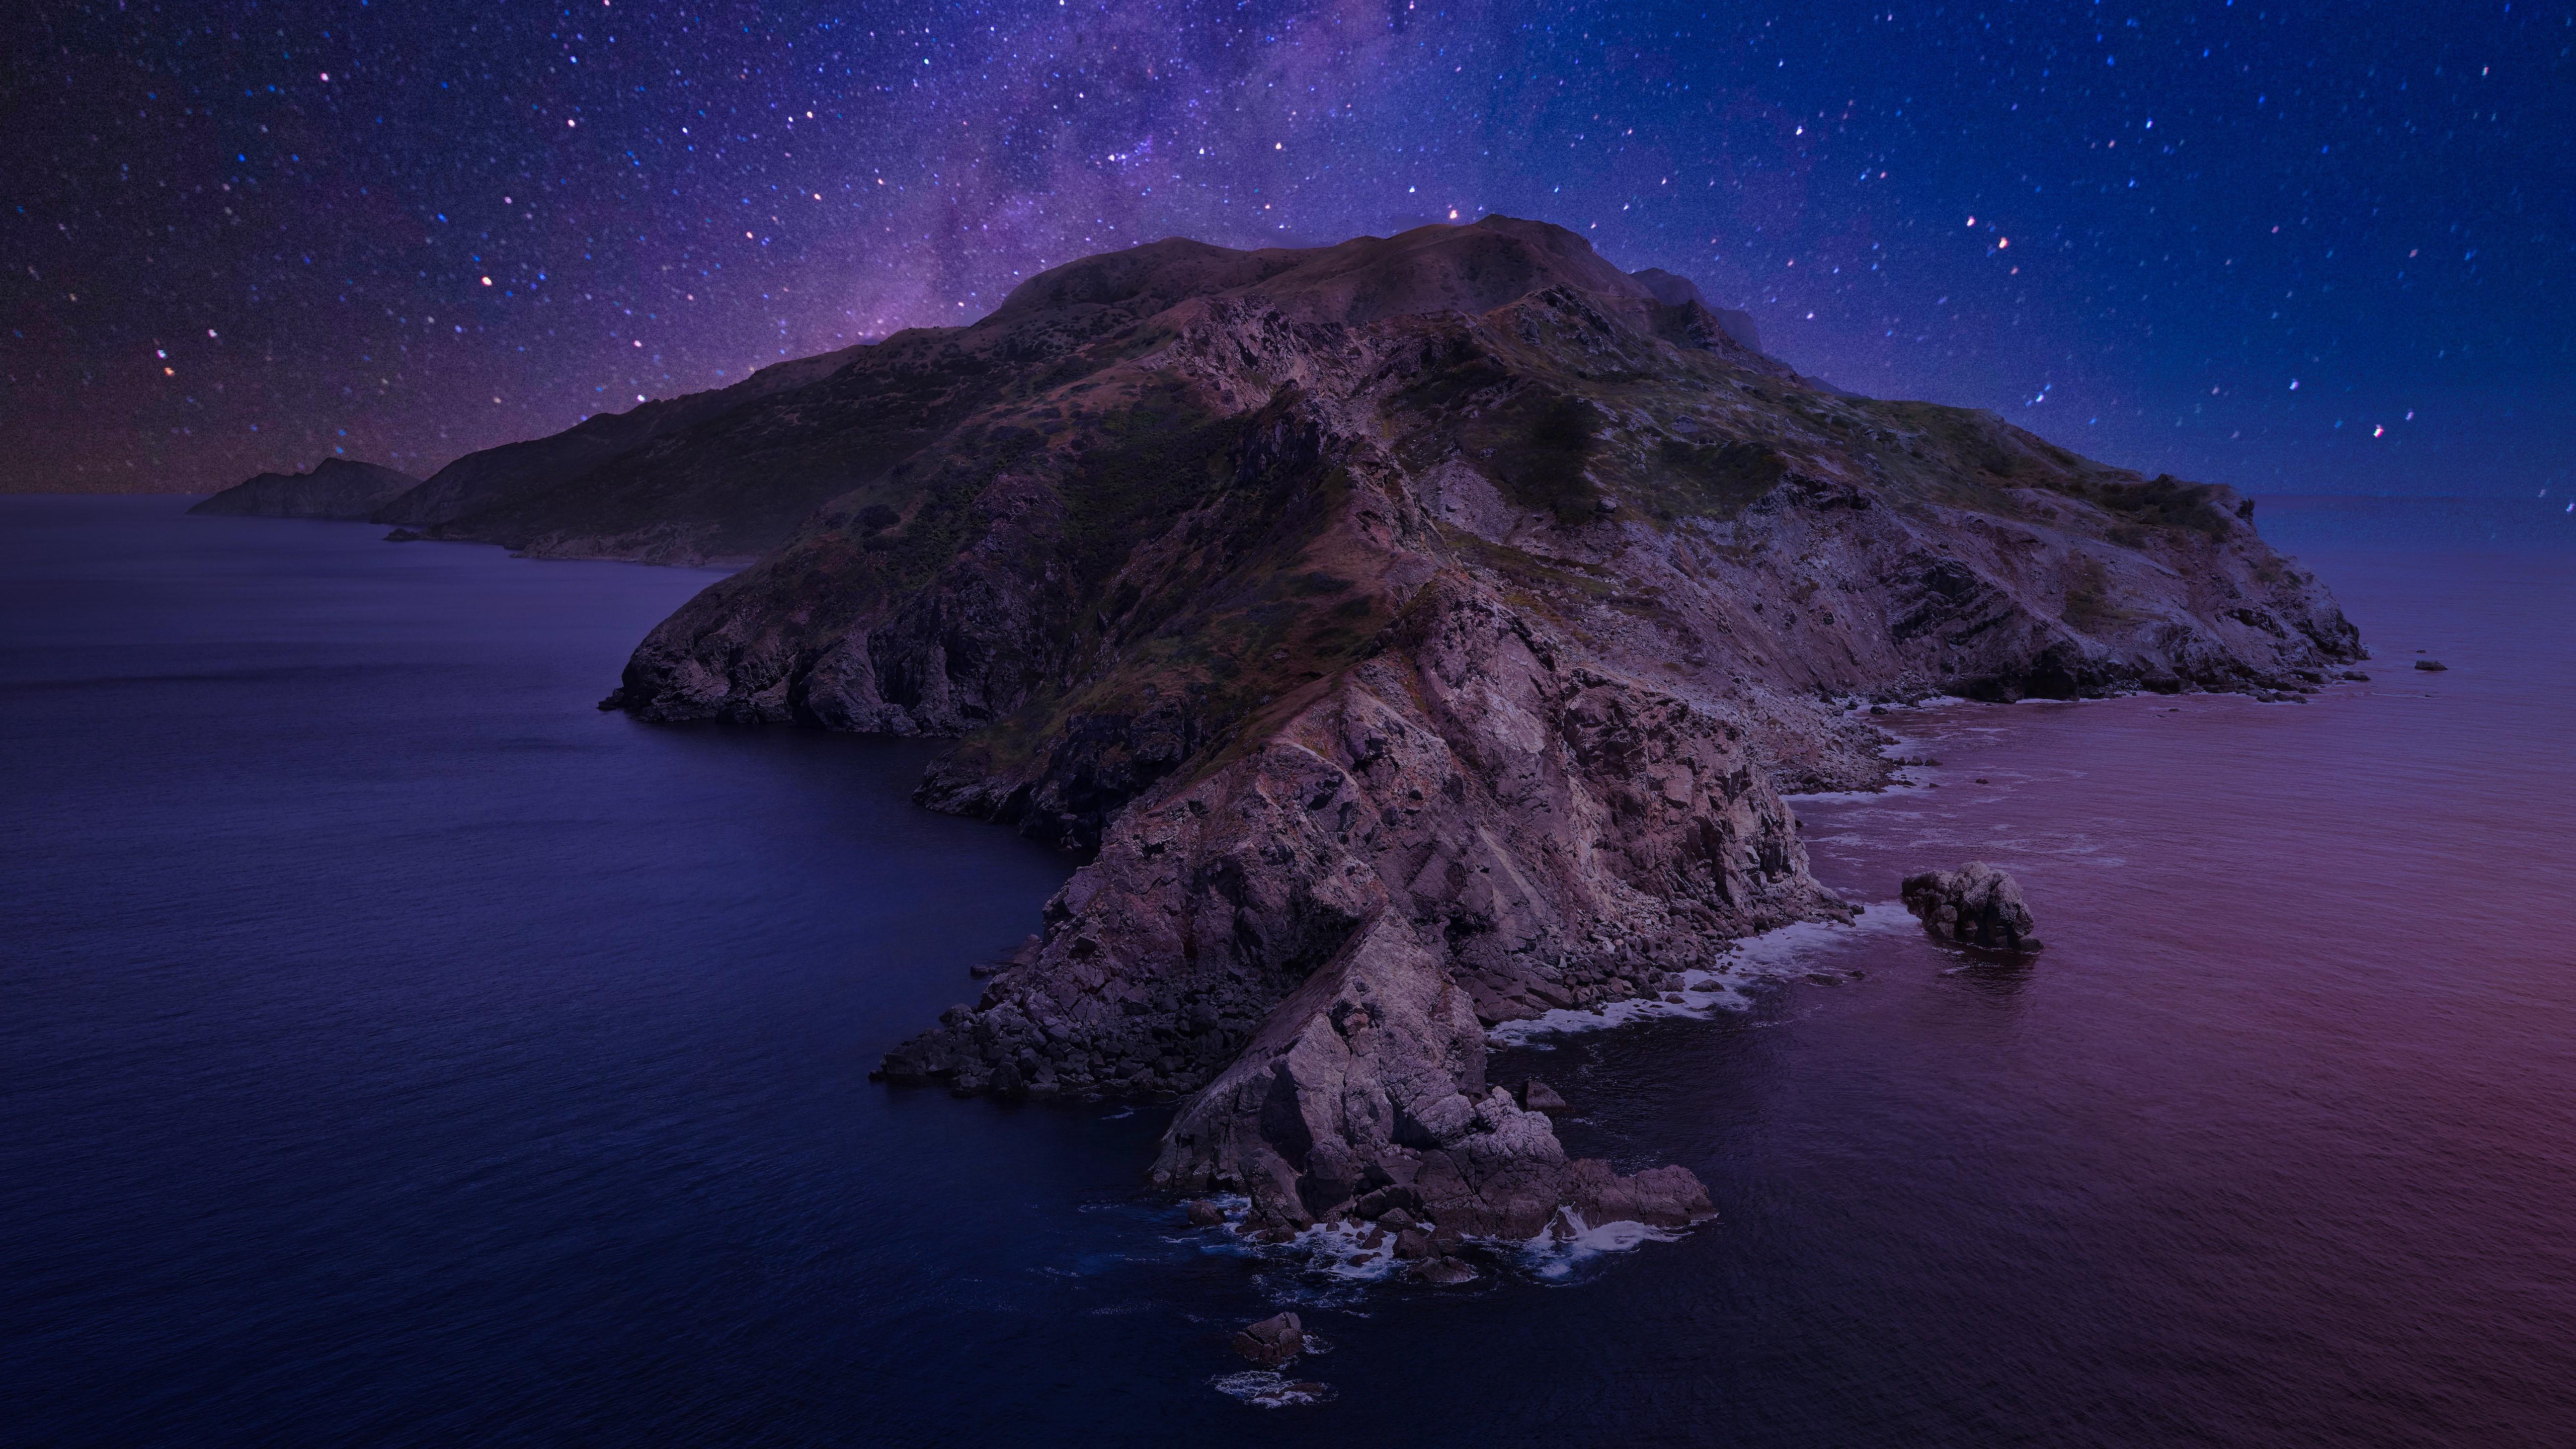 Catalina 4k Wallpapers For Your Desktop Or Mobile Screen Free And Easy To Download